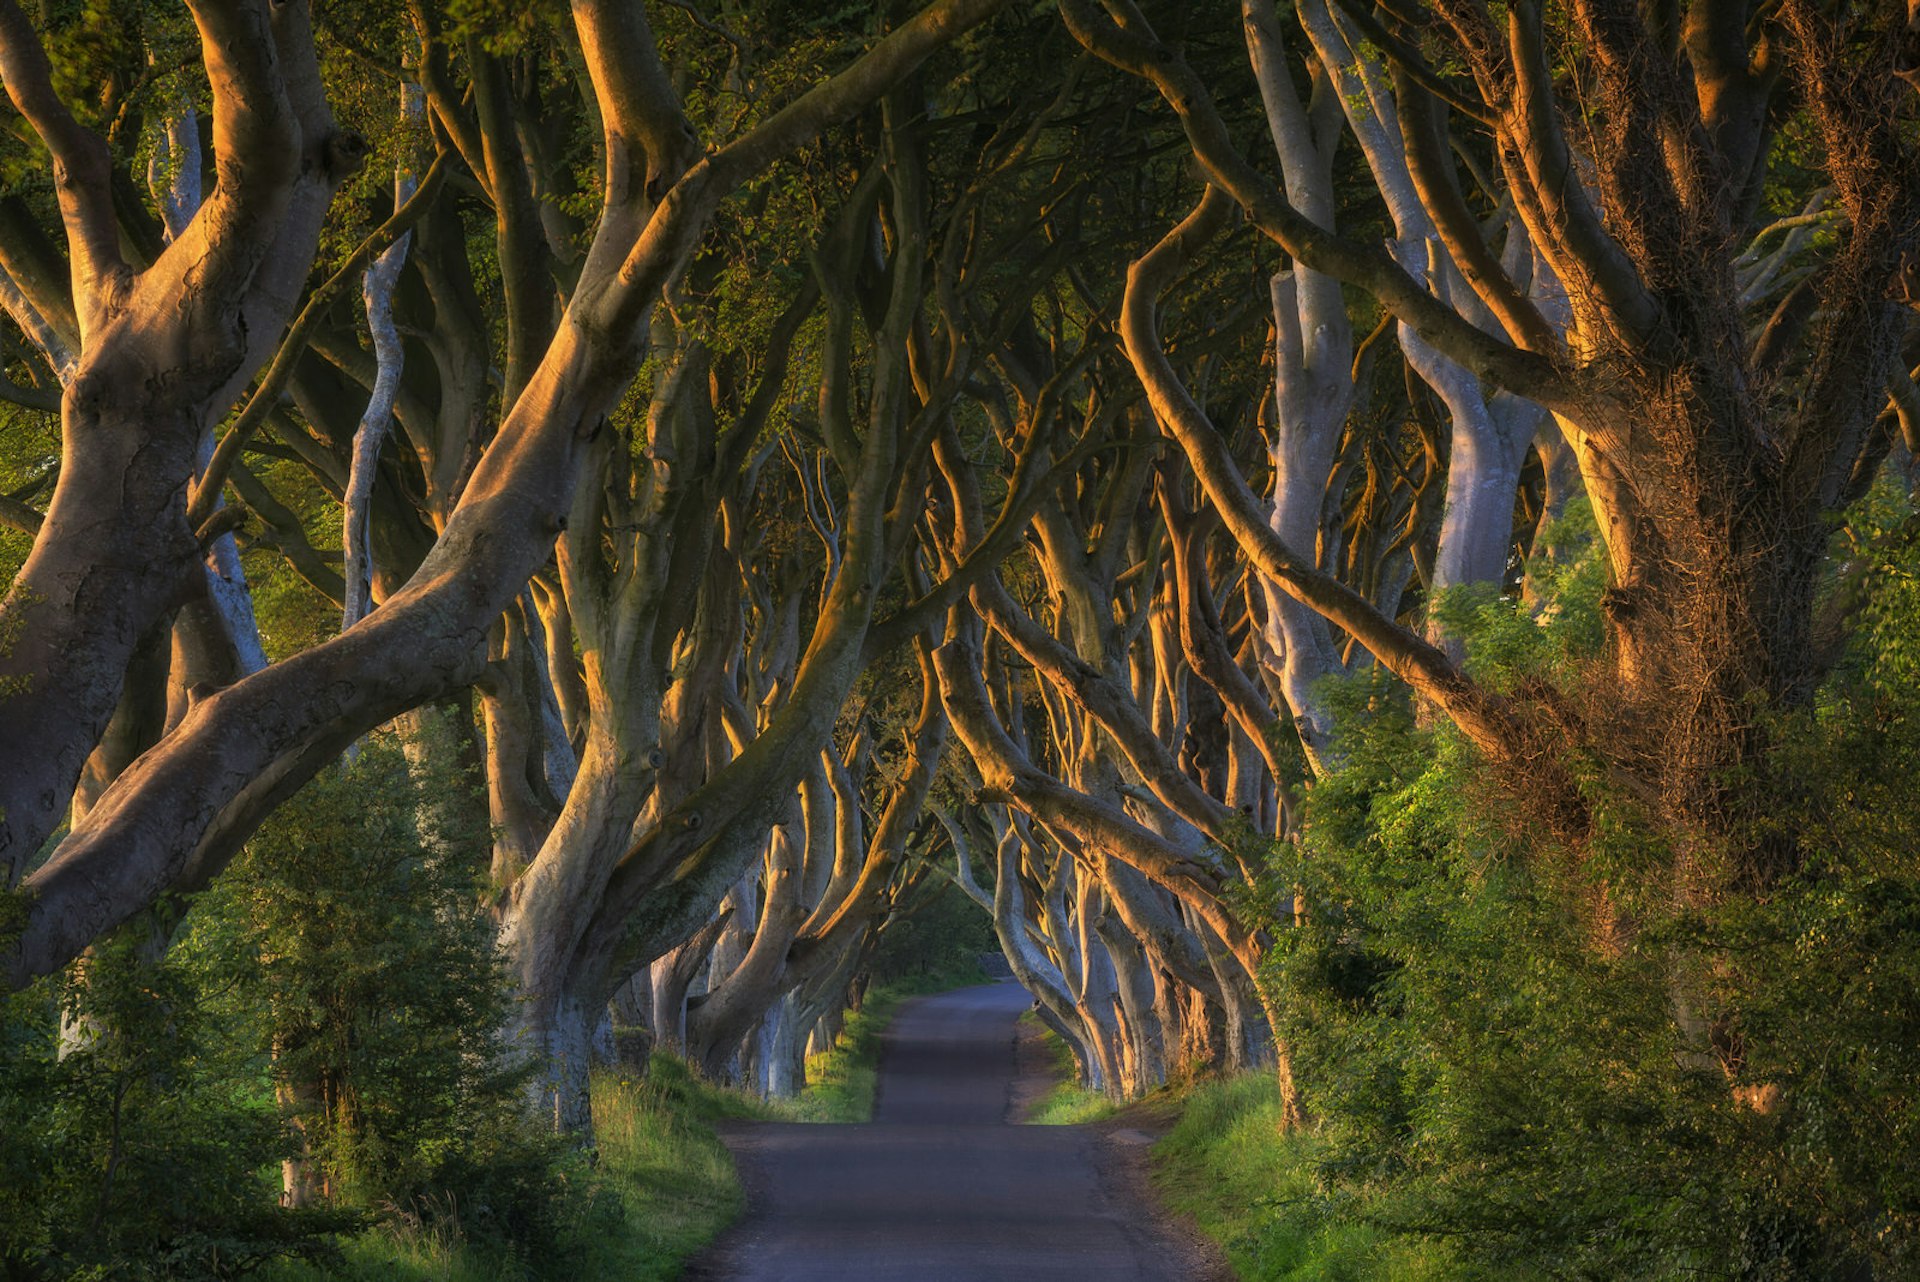 The Dark Hedges, aka the Kingsroad, are a beautiful sight whether you're a Game of Thrones fan or not © Westend61 / Getty Images